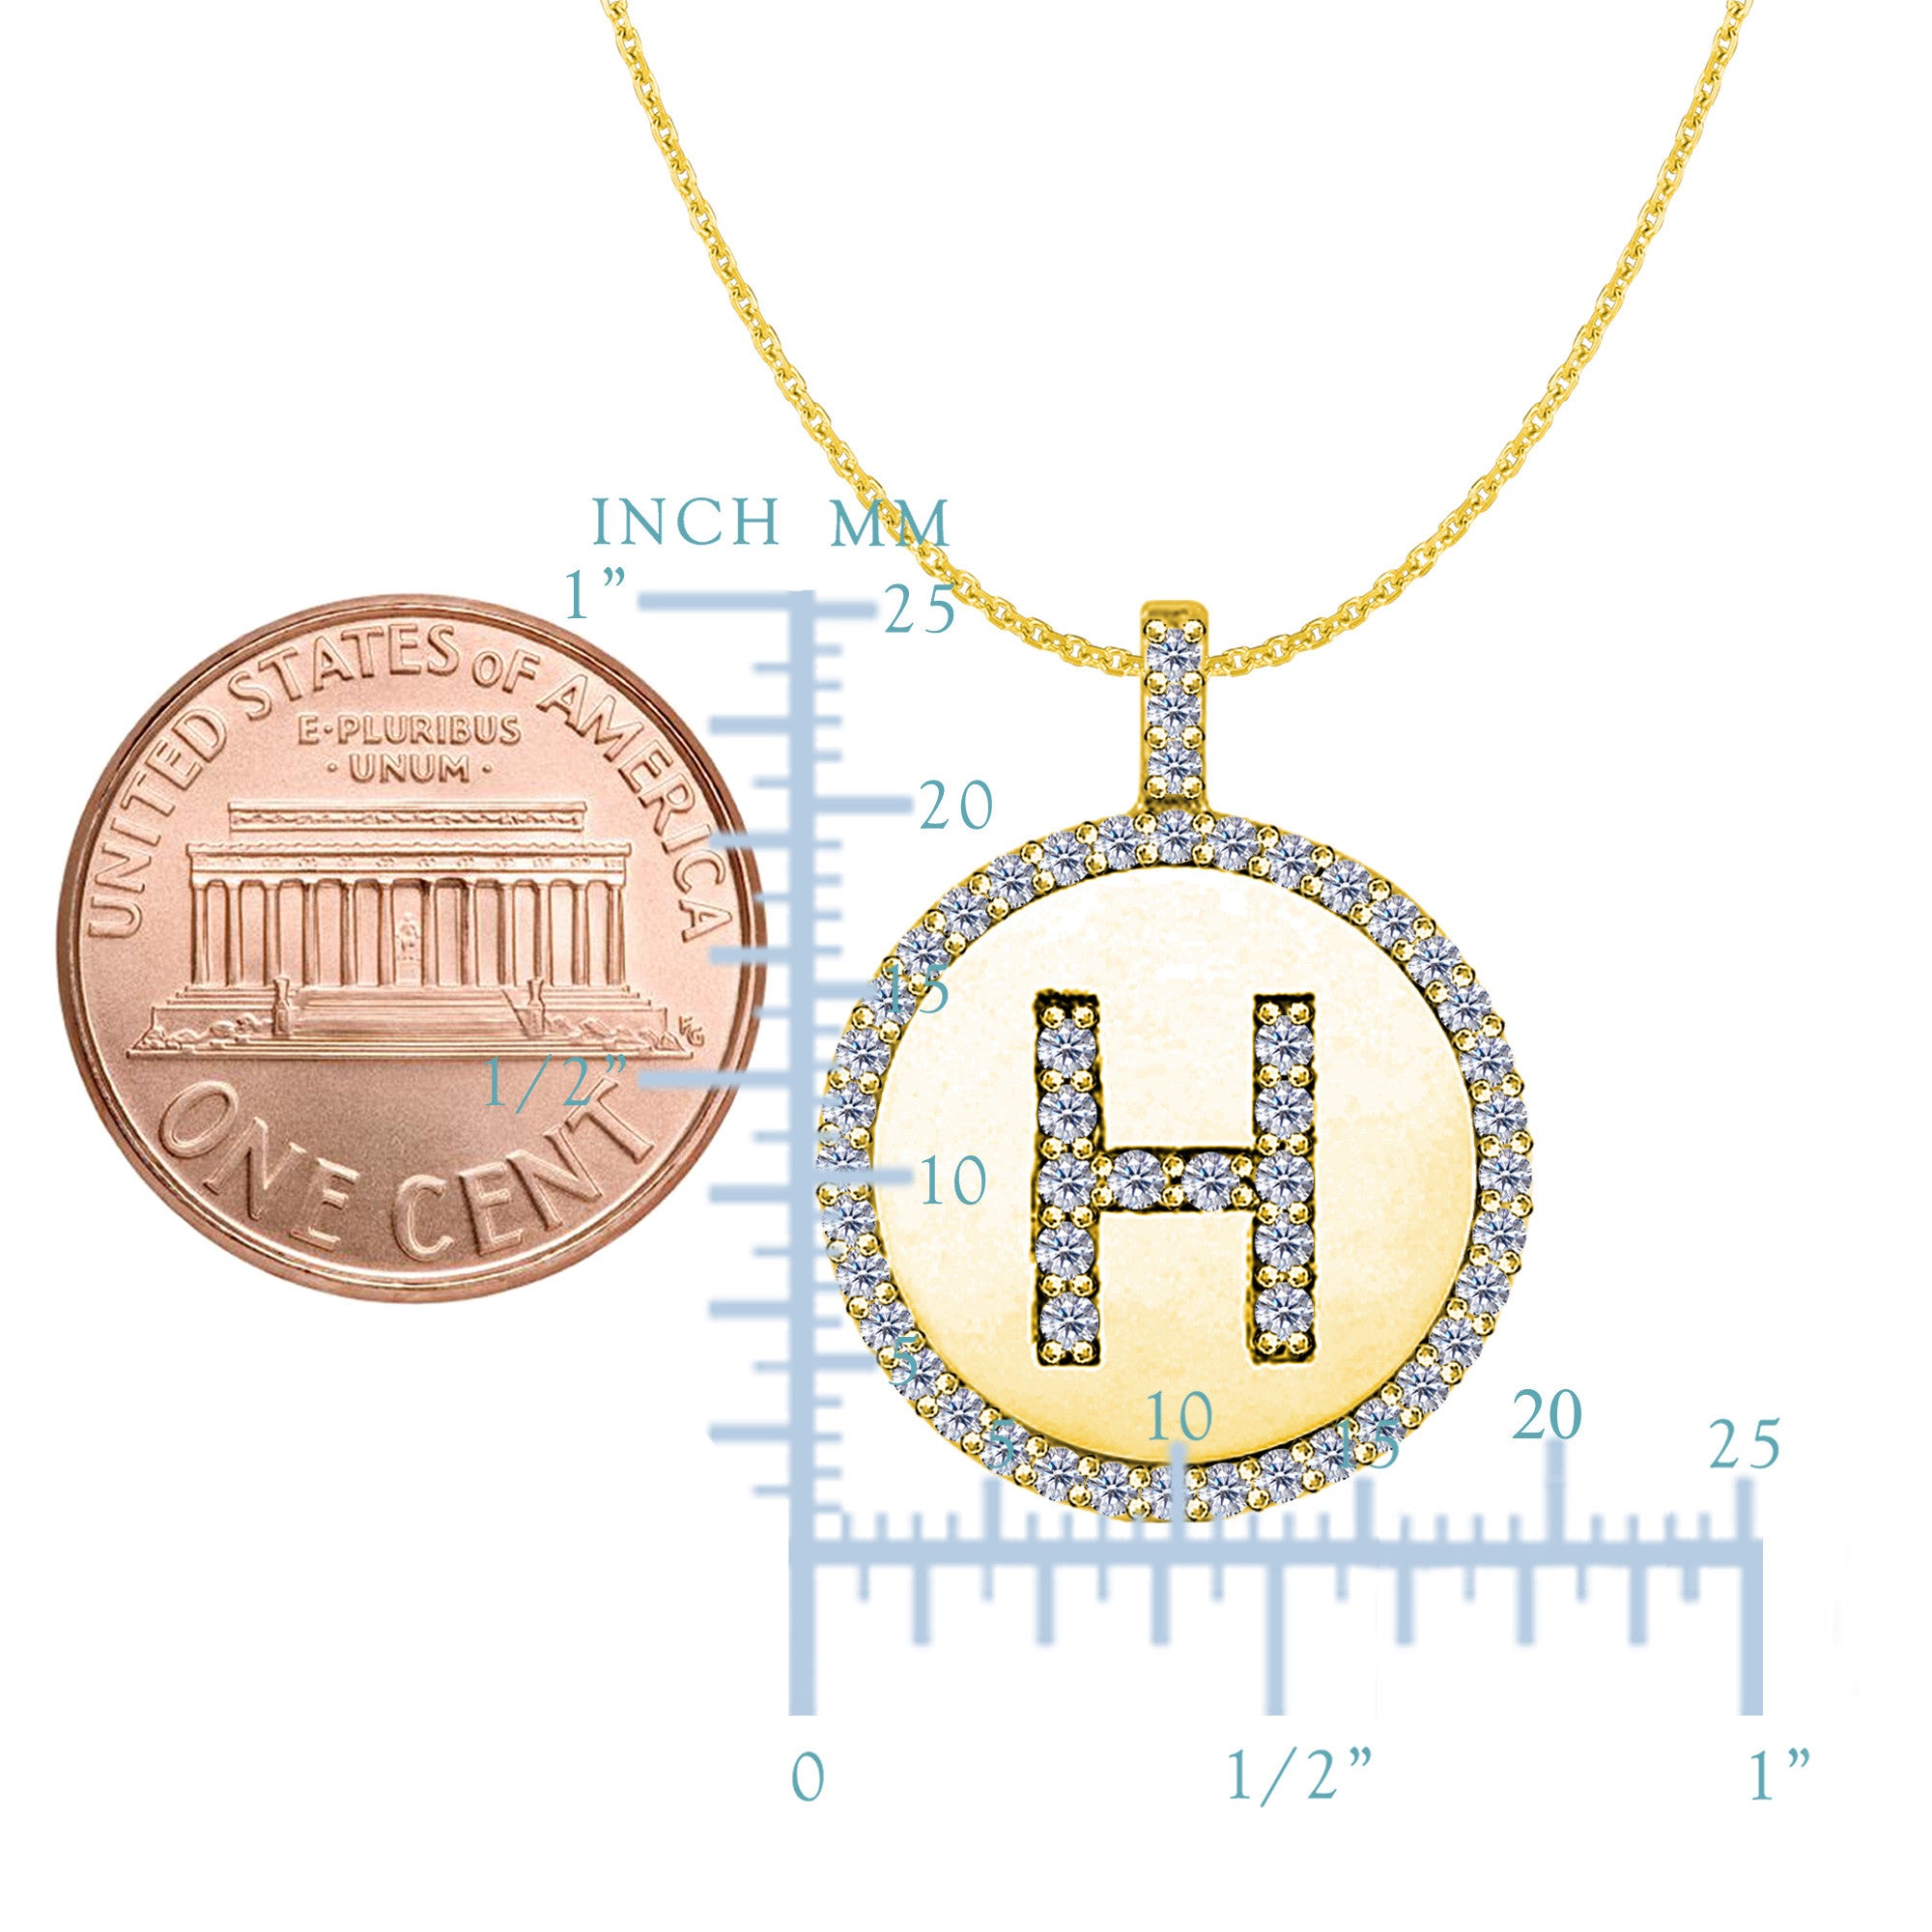 "H" Diamond Initial 14K Yellow Gold Disk Pendant (0.54ct) fine designer jewelry for men and women